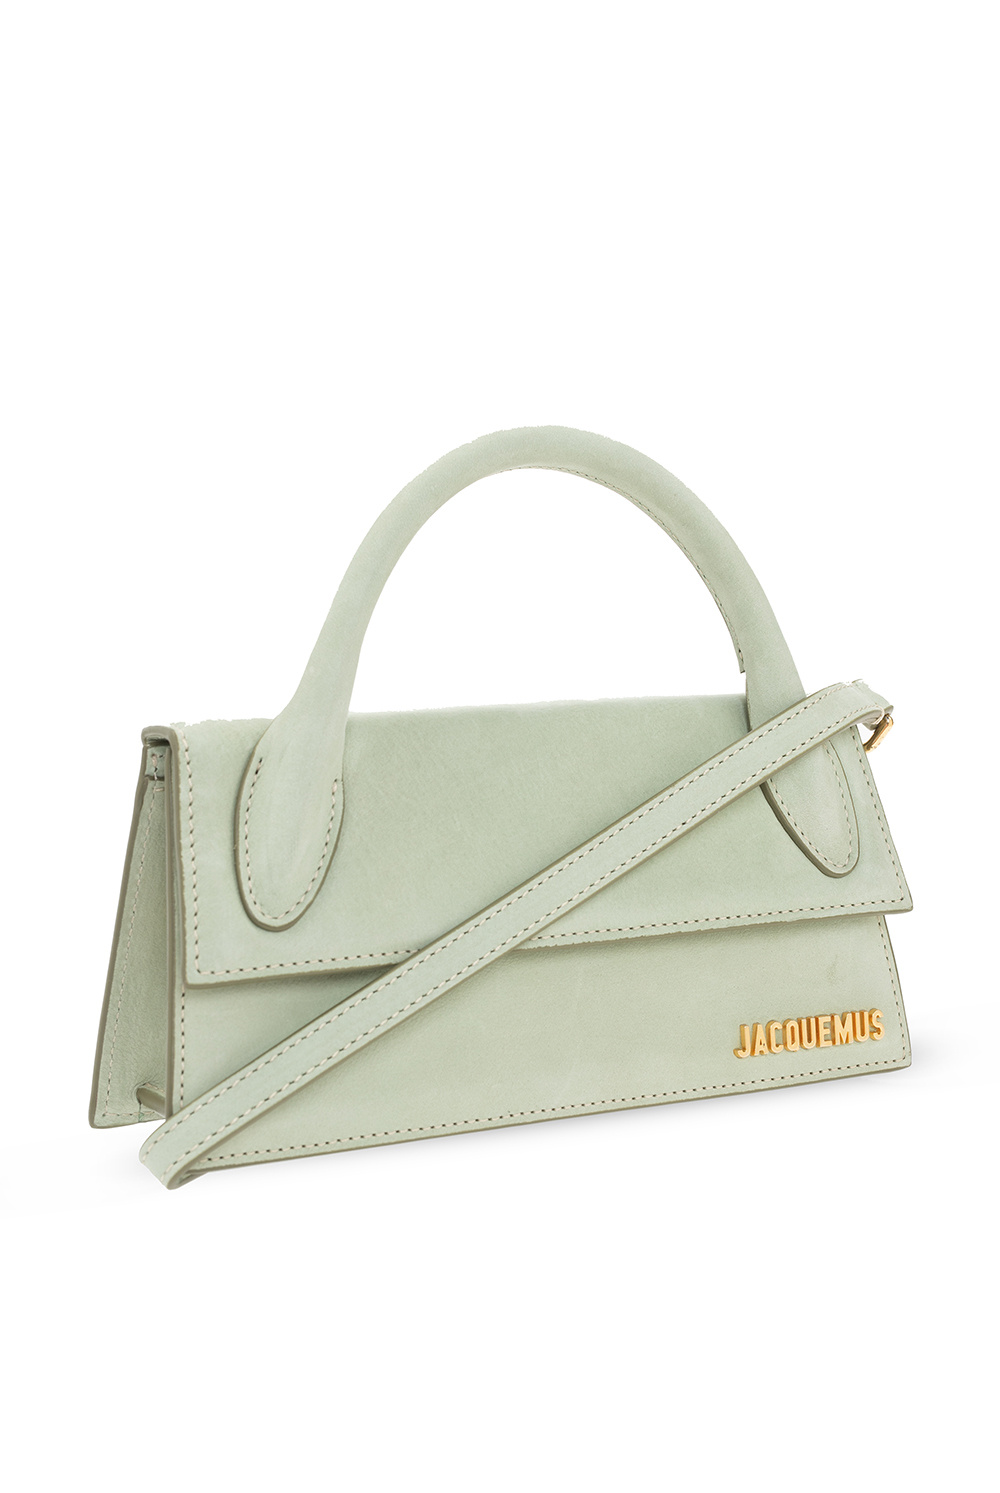 Jacquemus Le Chiquito Long Bag in Green